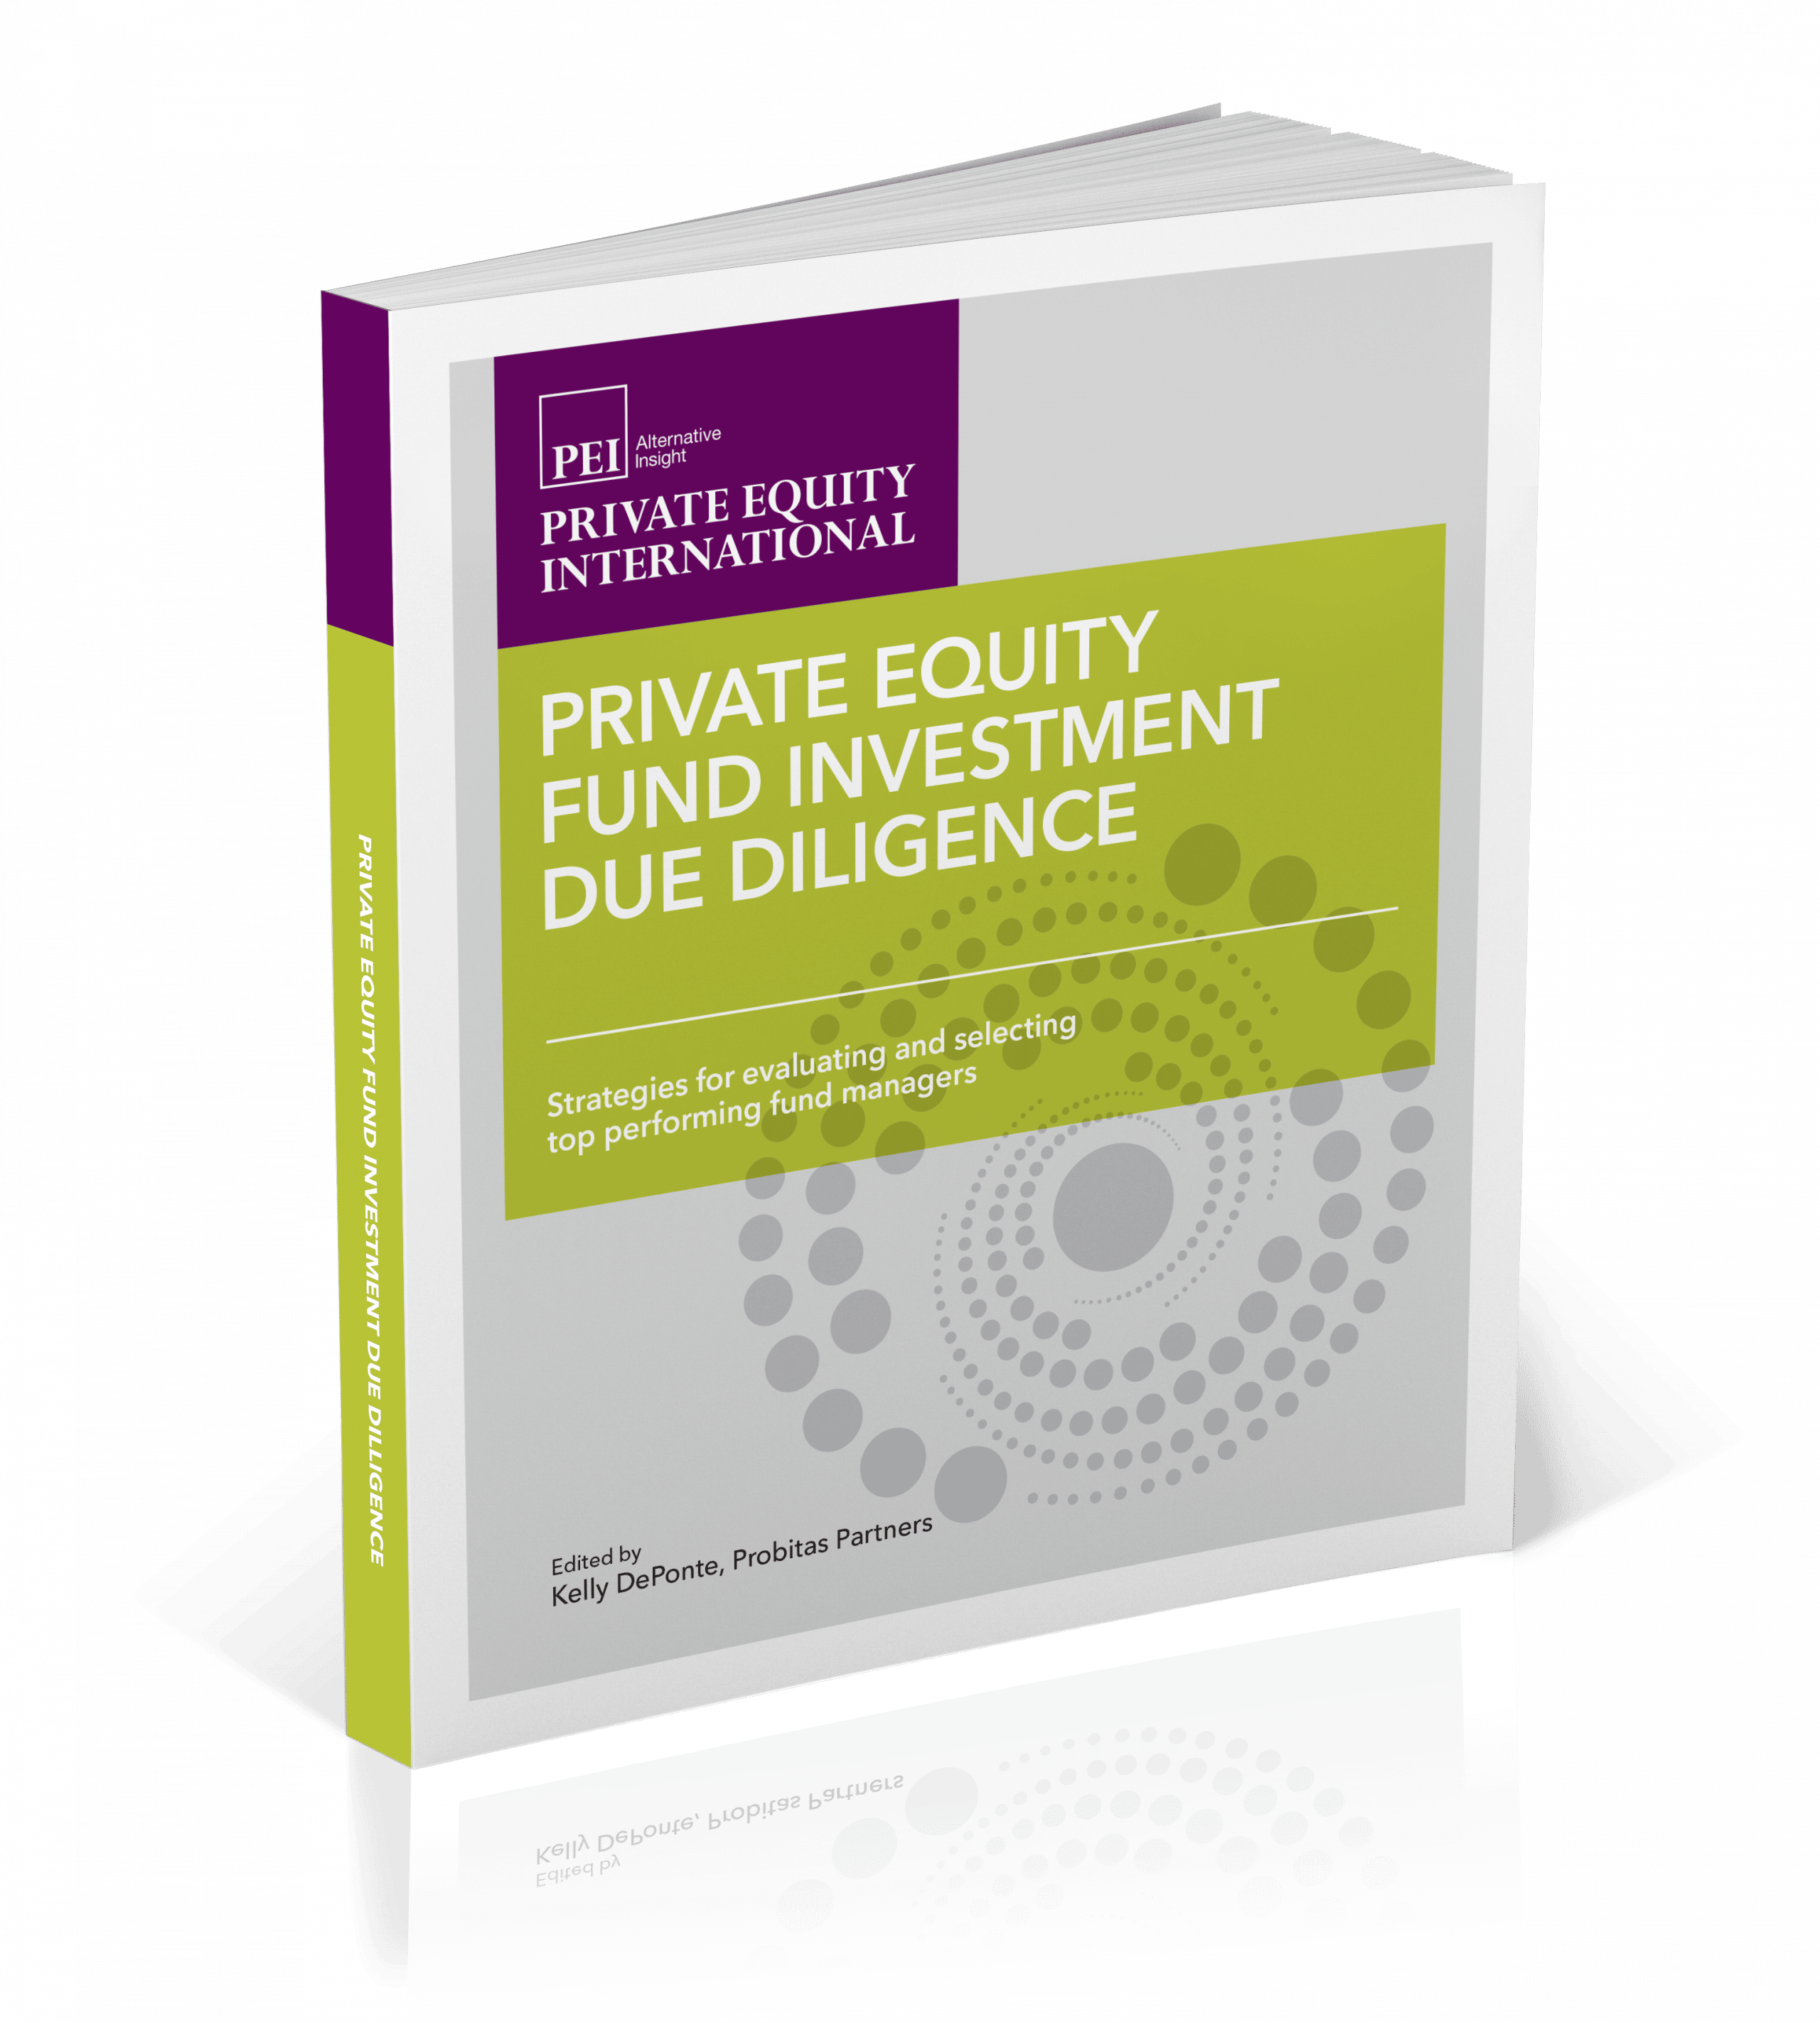 Private Equity Fund Investment Due Diligence